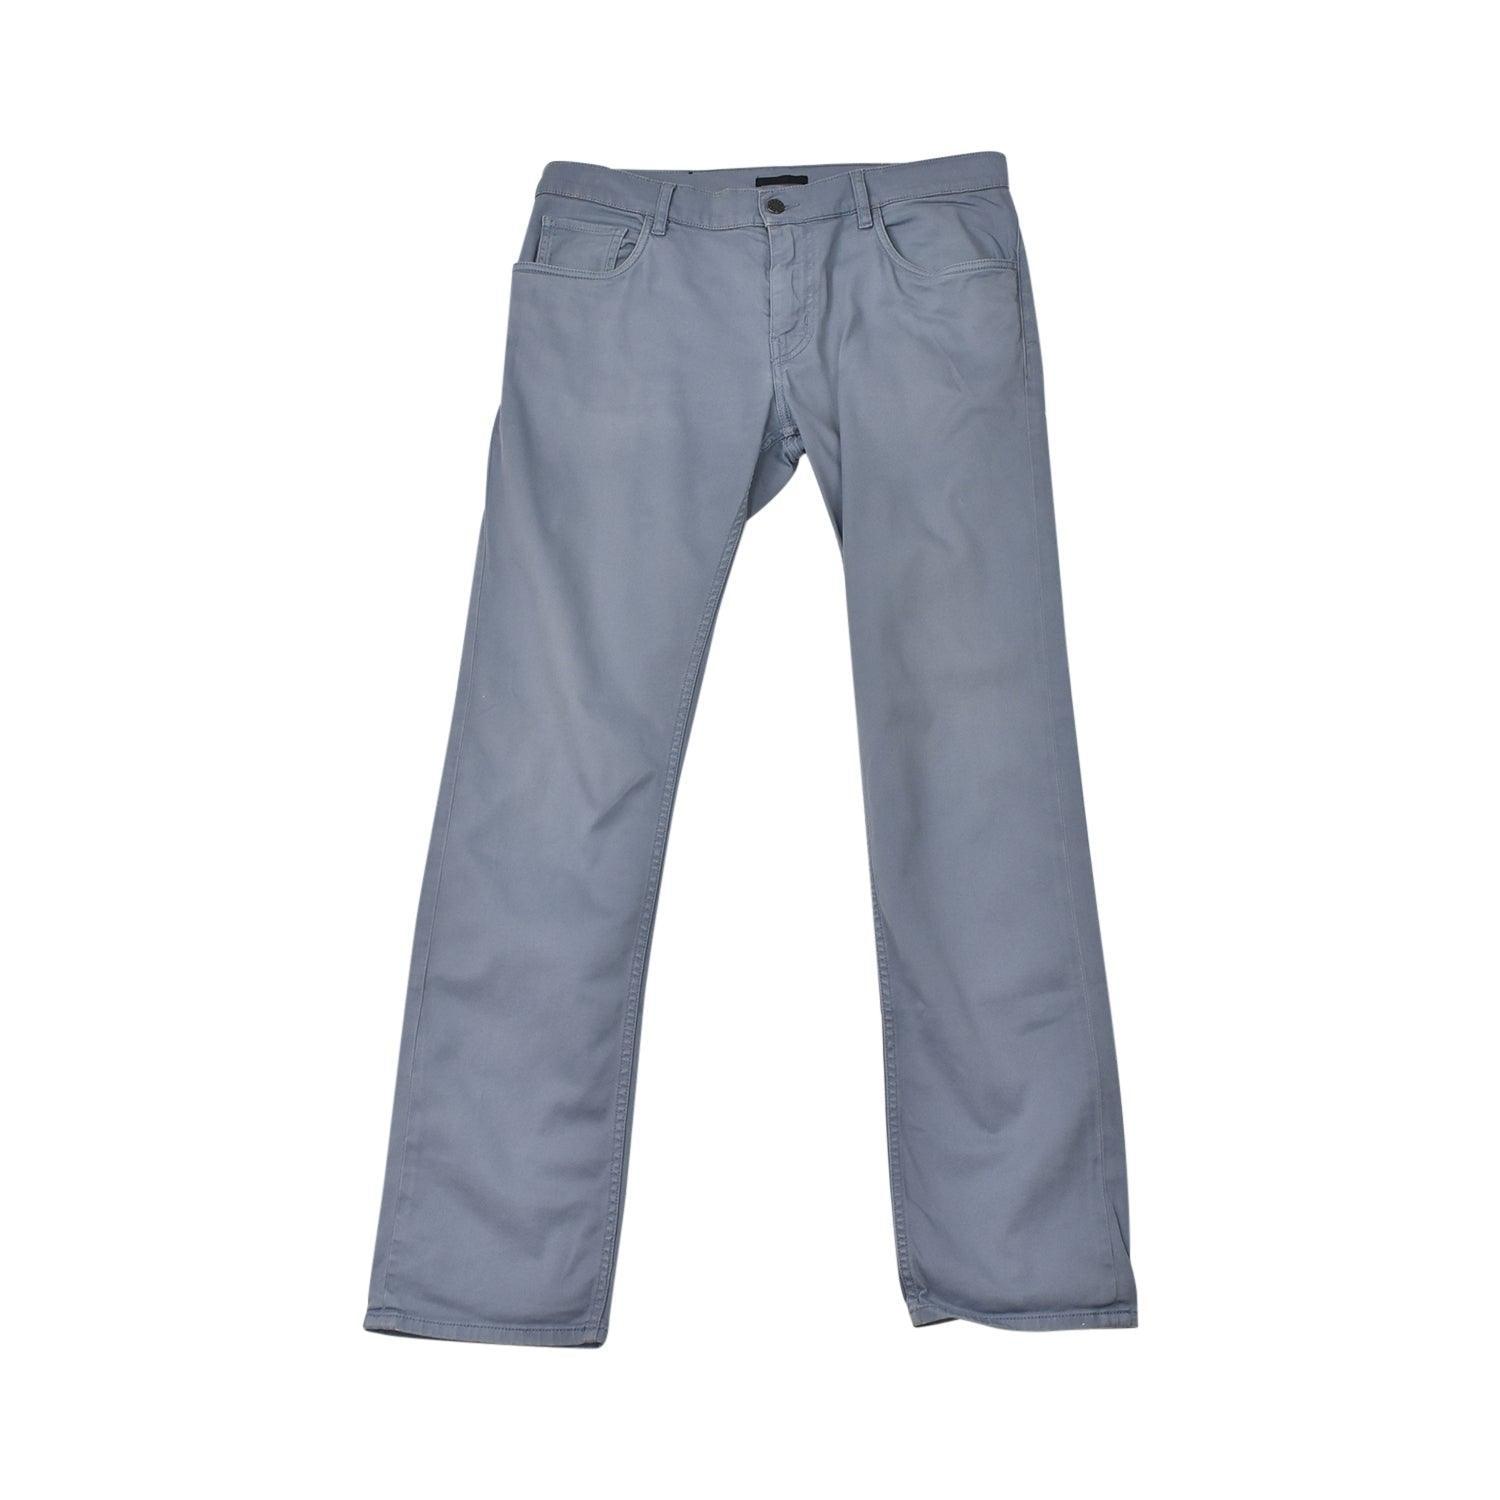 Prada Trousers - Men's 34 - Fashionably Yours